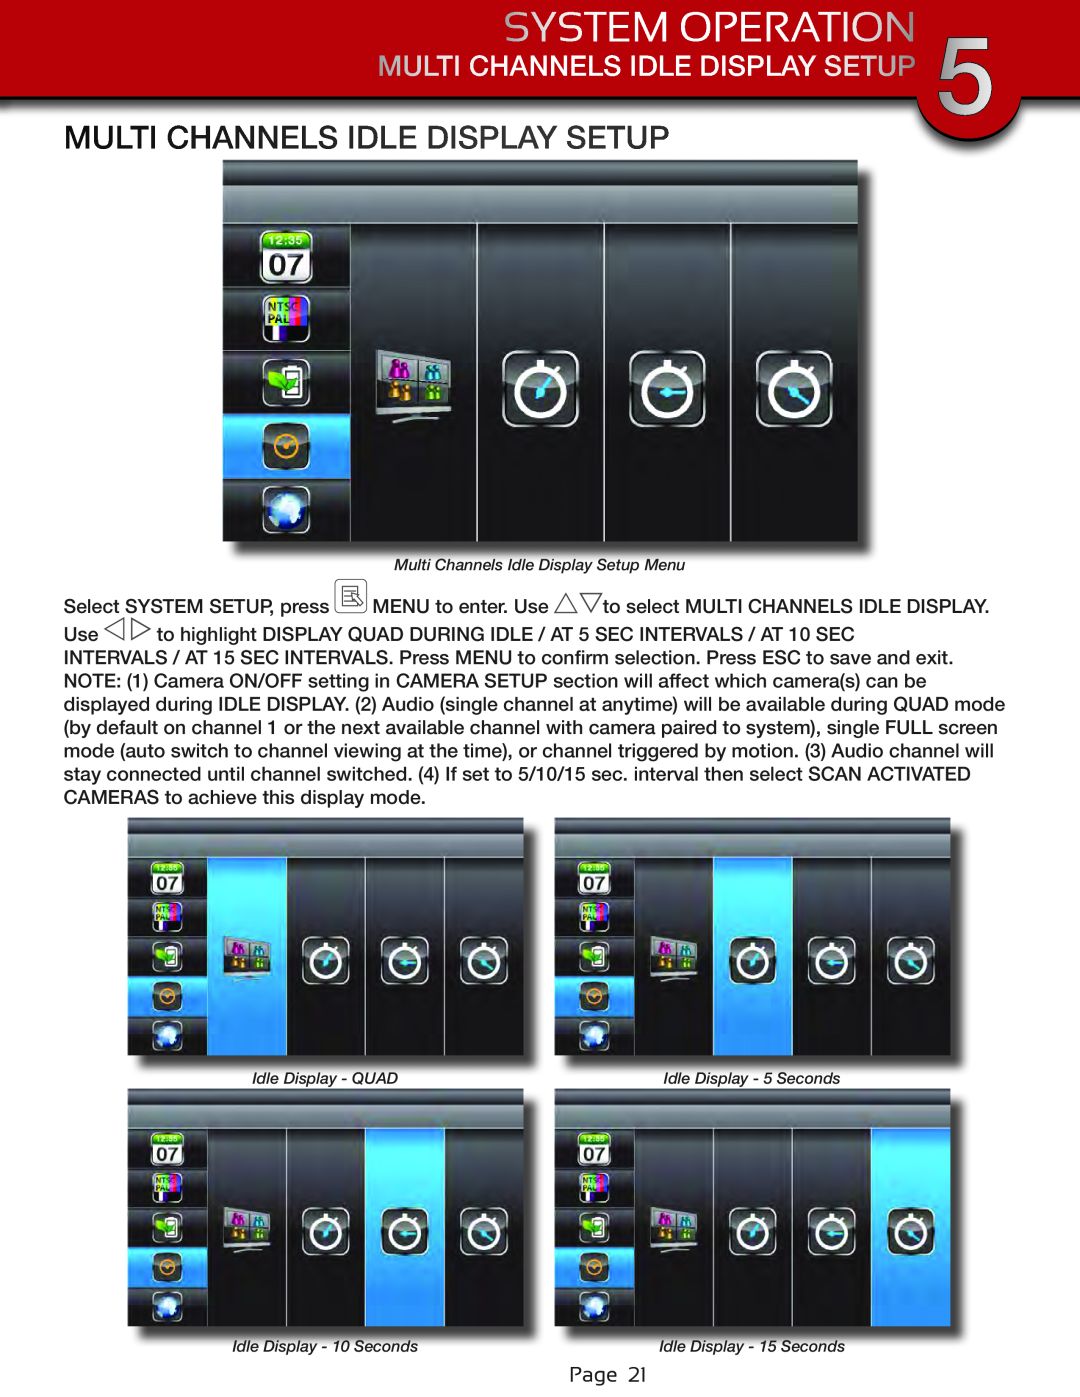 First Alert DWS-471, DWS-472 user manual Multi Channels Idle Display Setup, System Operation 